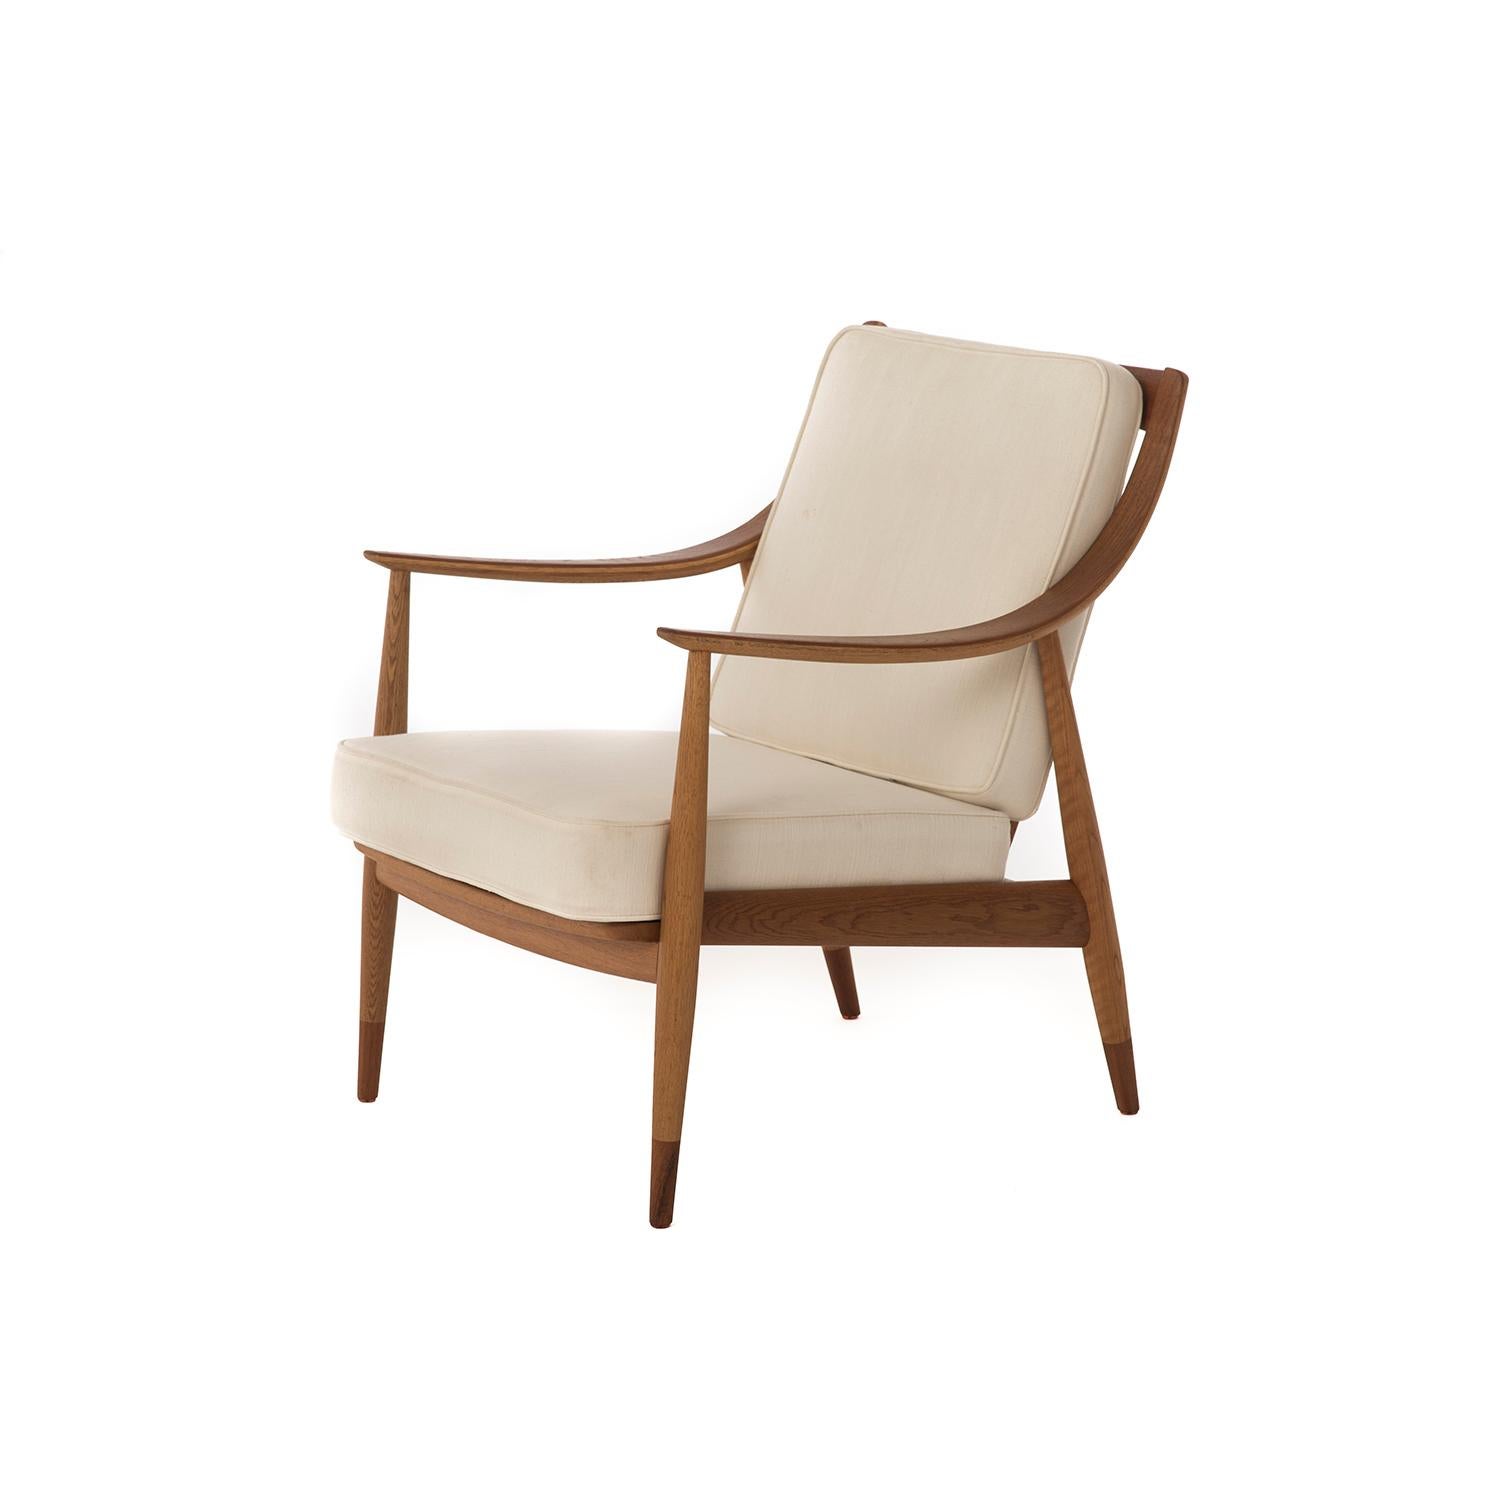 This Scandinavian Mid-Century Modern lounge chair features a sweeping arm and mid-height spindle back. The frame is a combination of oiled teak and oak that is elegant and timeless. Sprung removable cushions are upholstered in a bone white